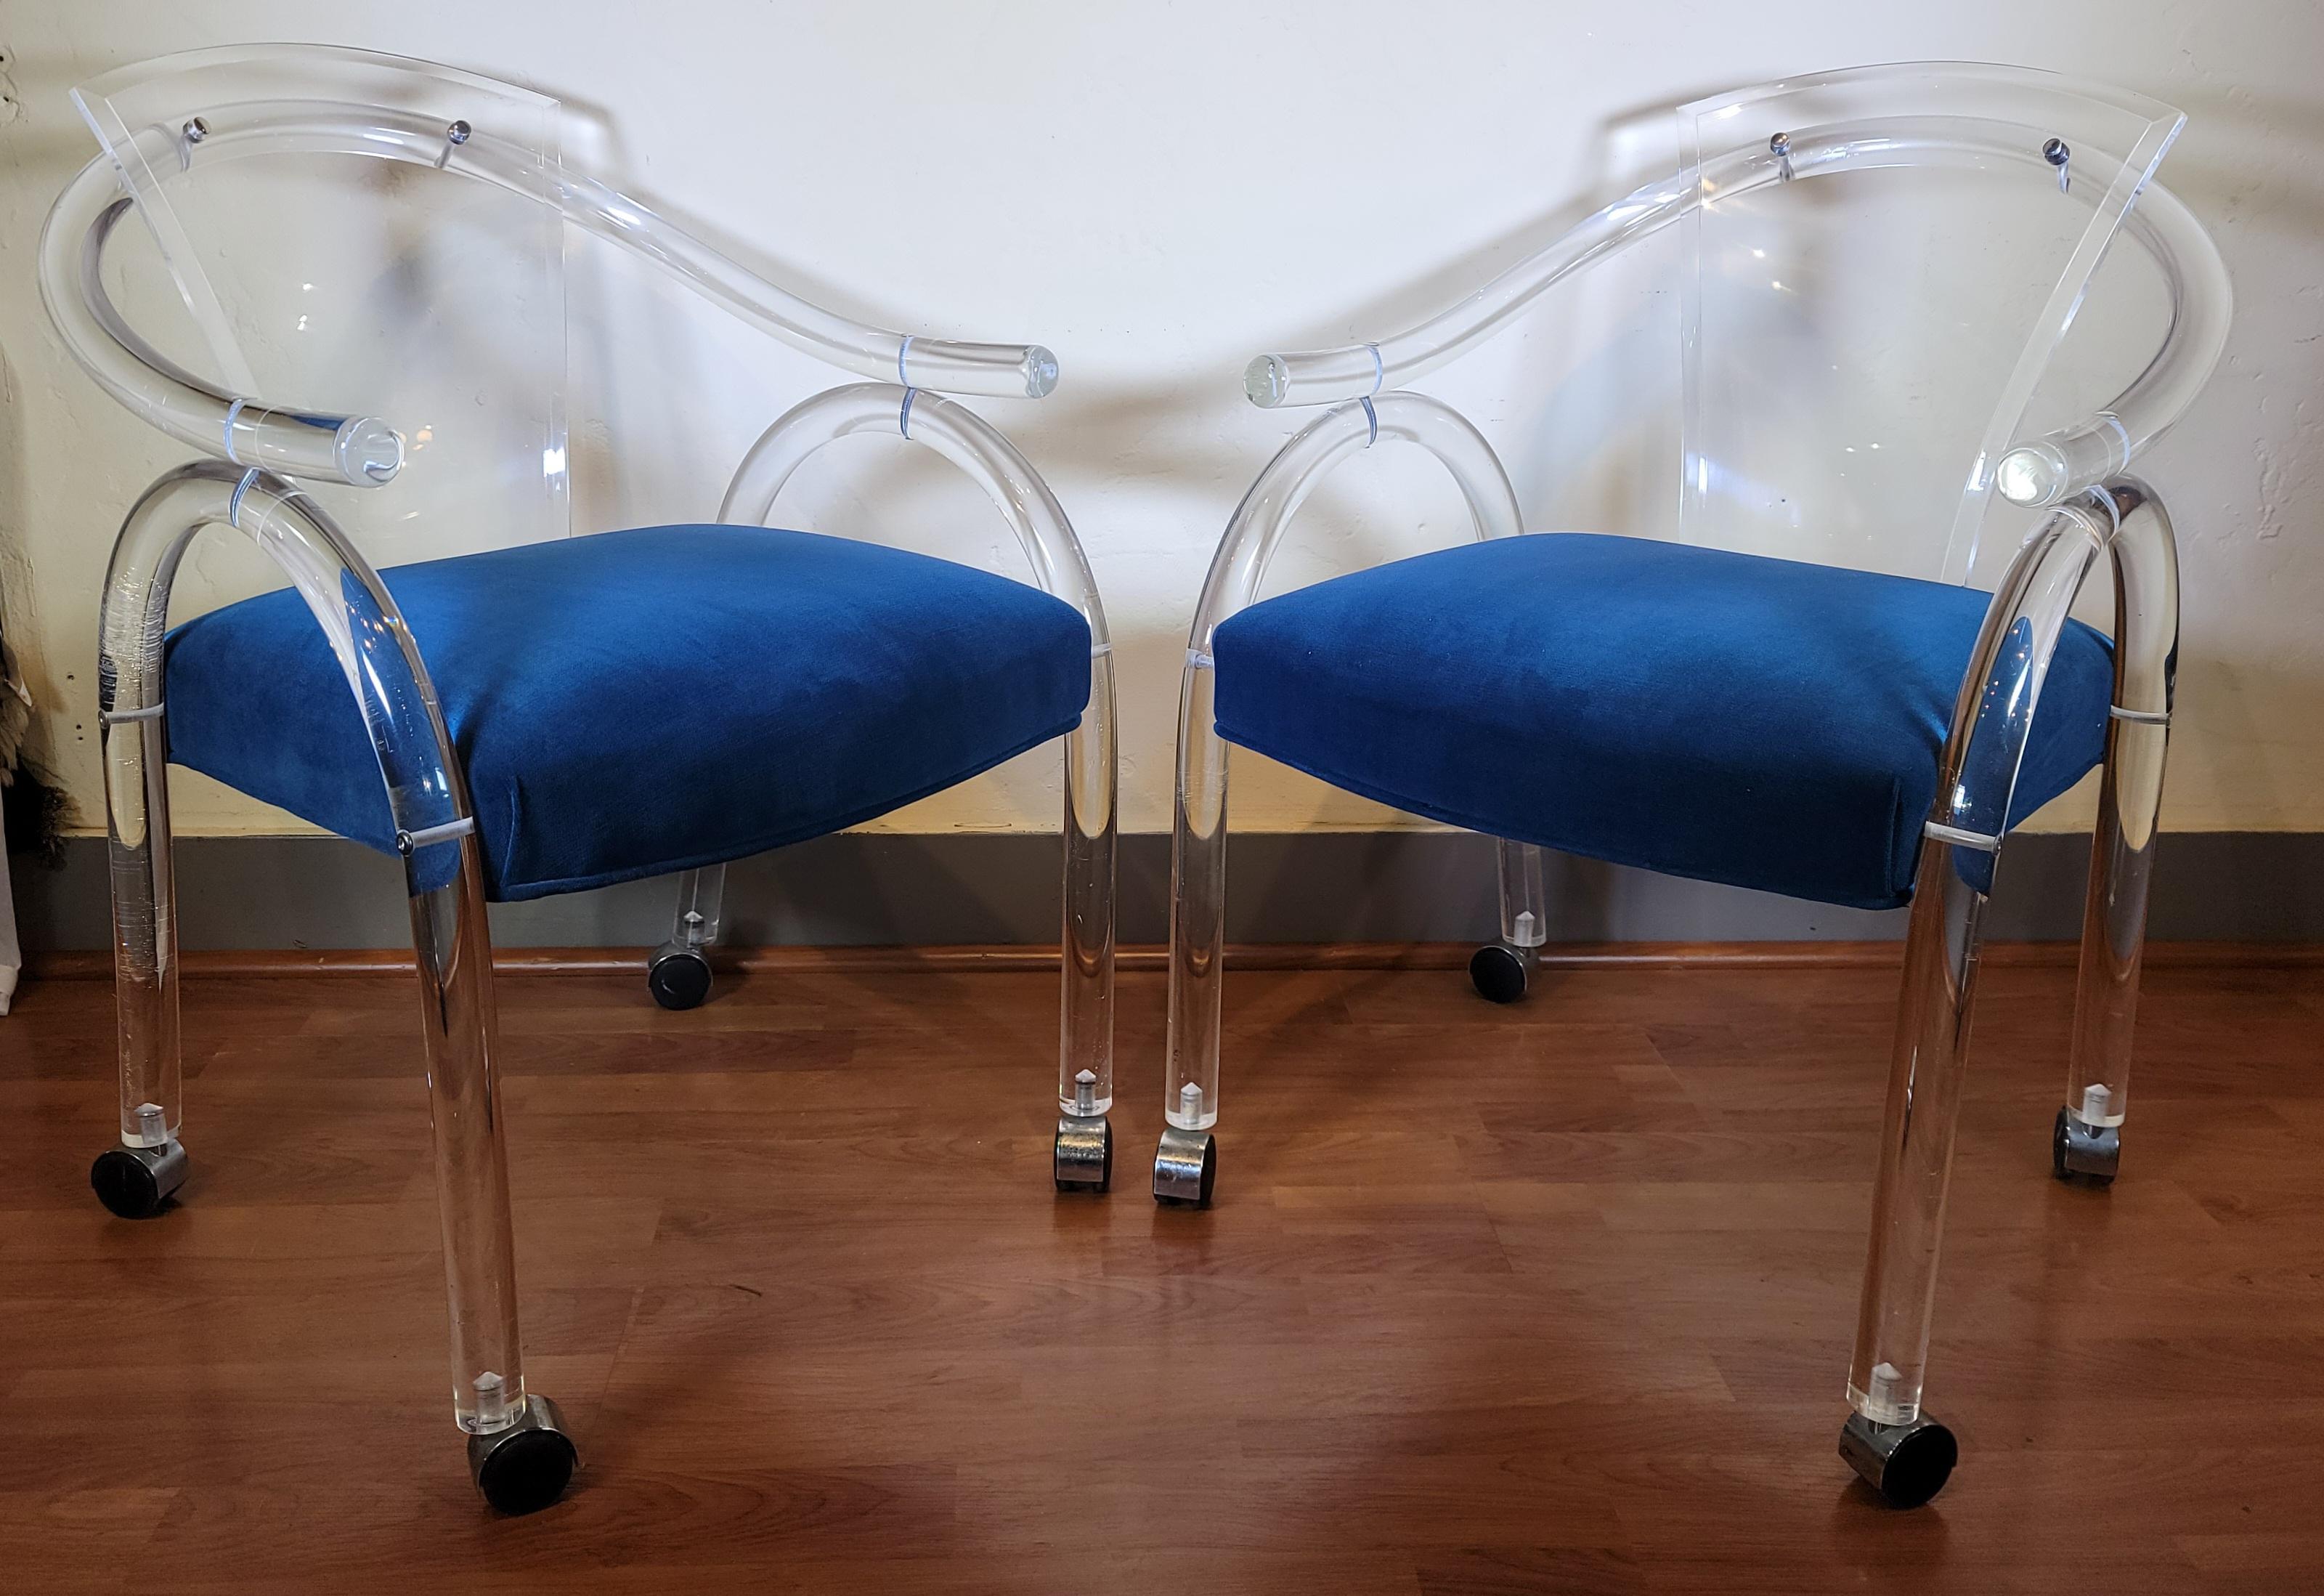 Pair of 1970s Acrylic Charles Hollis Jones style chairs. Great curved shape to the body. Very strong and sturdy chairs with rollers for ease of use. Acrylic has a wonderful shine when hit by light.